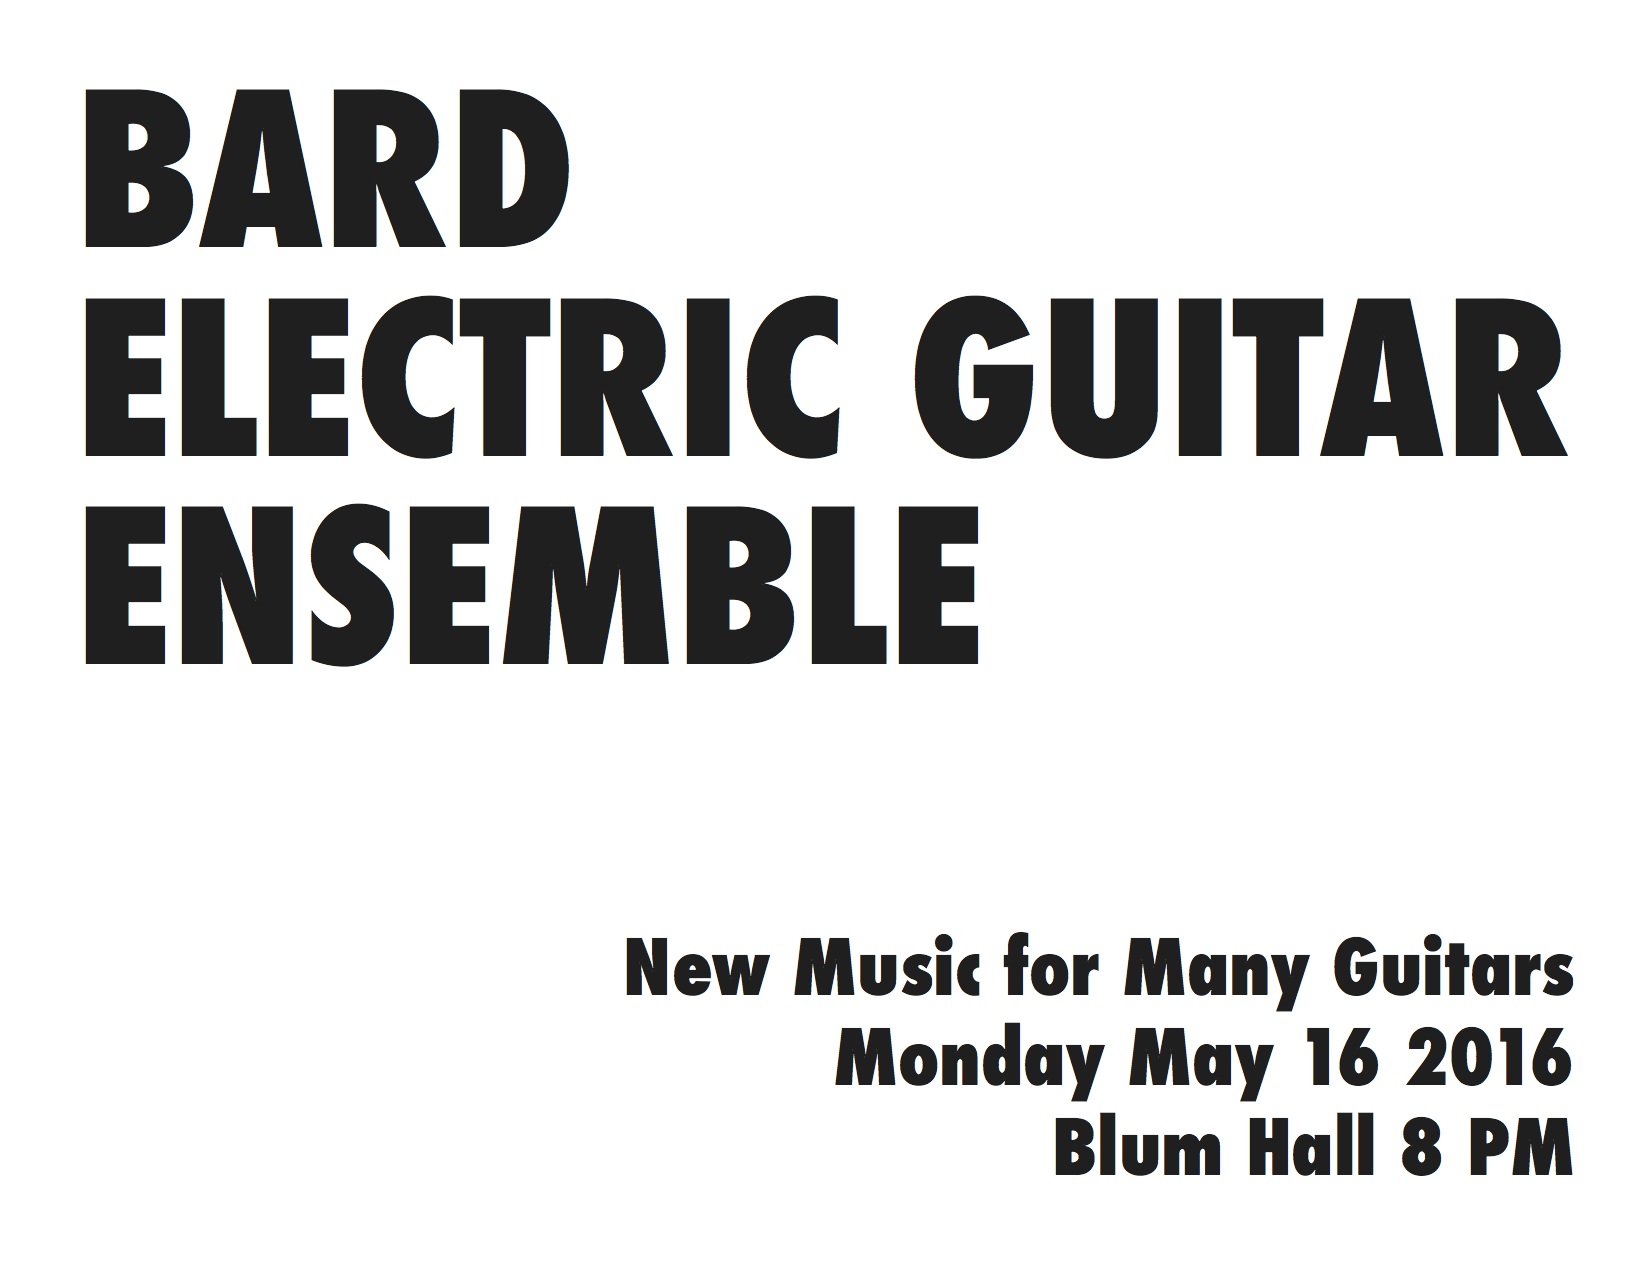 The Bard Electric Guitar Ensemble presents its first-ever concert!